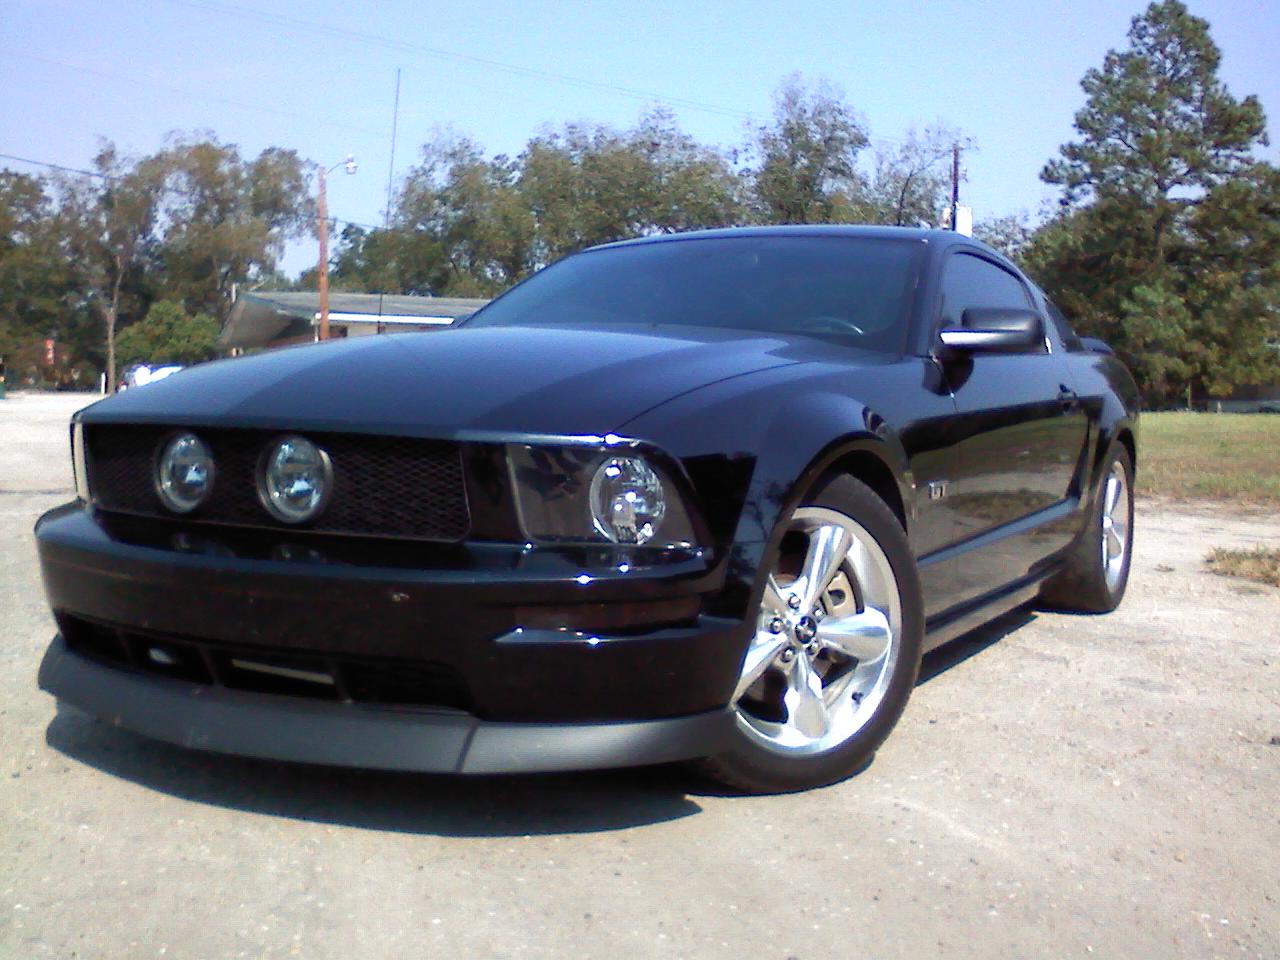 2008 Ford mustang gt quarter mile #4